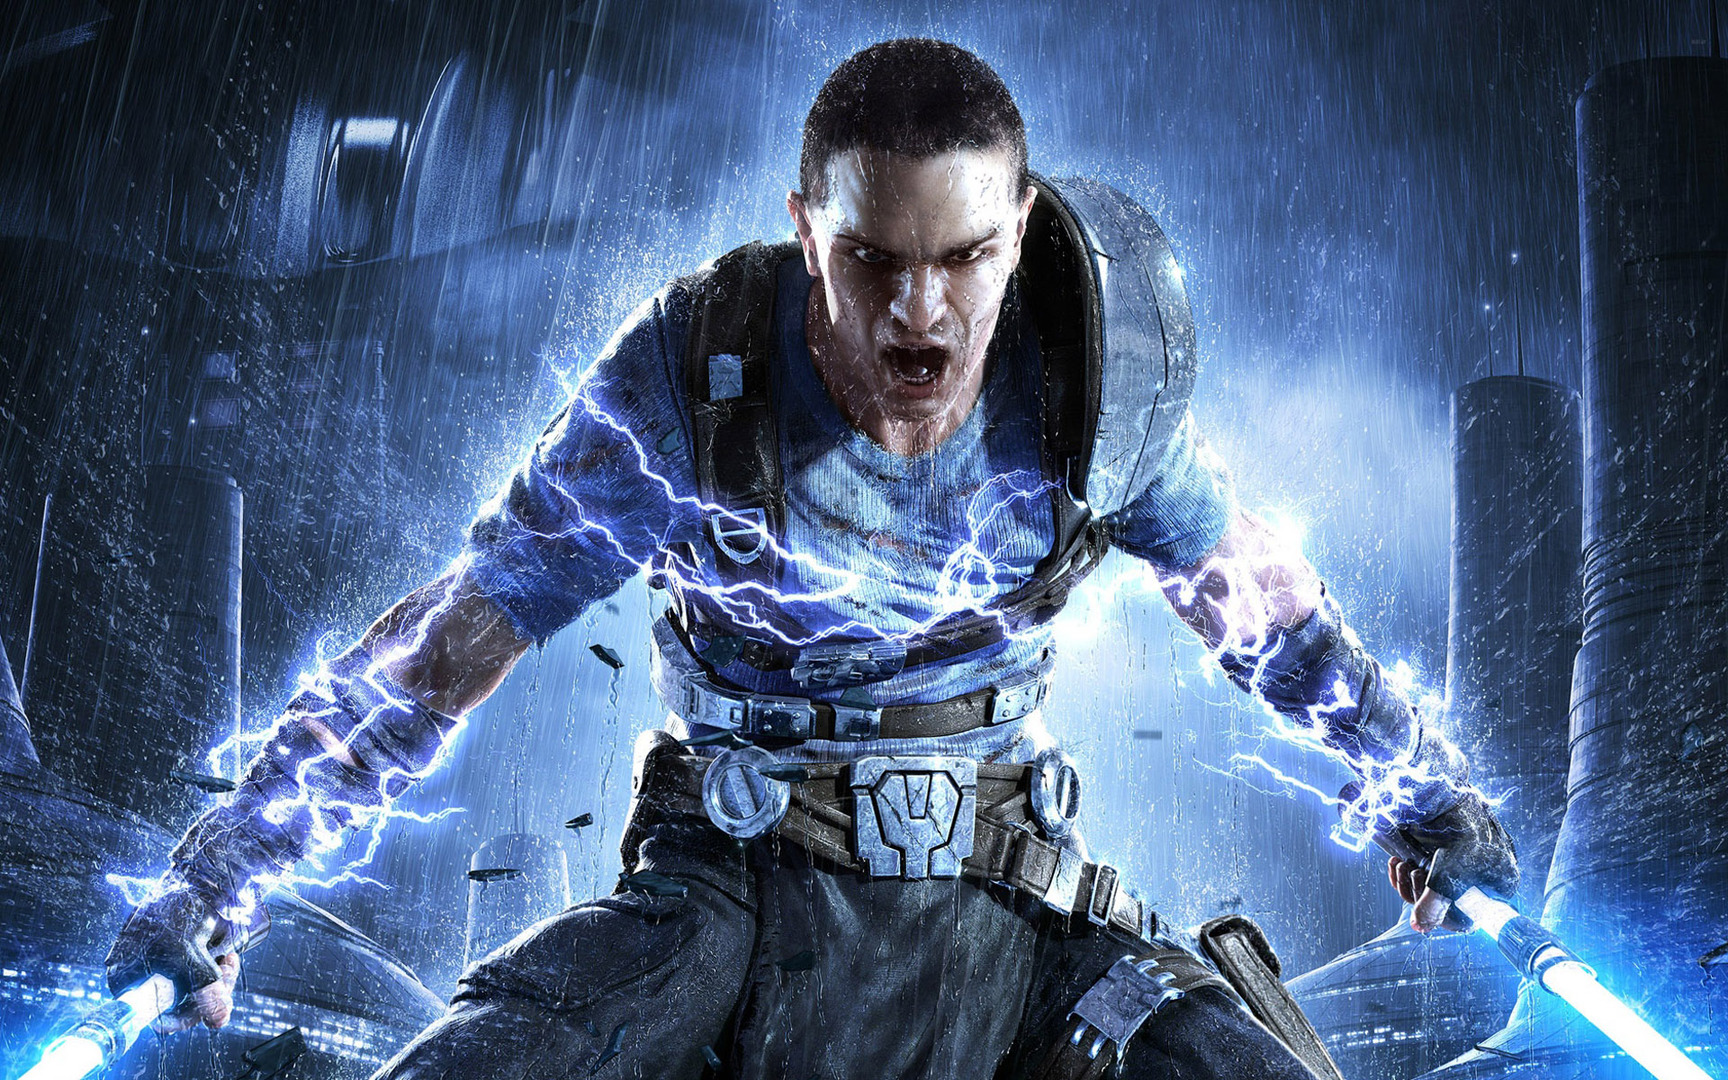 Download Star Wars - The Force Unleashed II Wallpaper | Chainimage